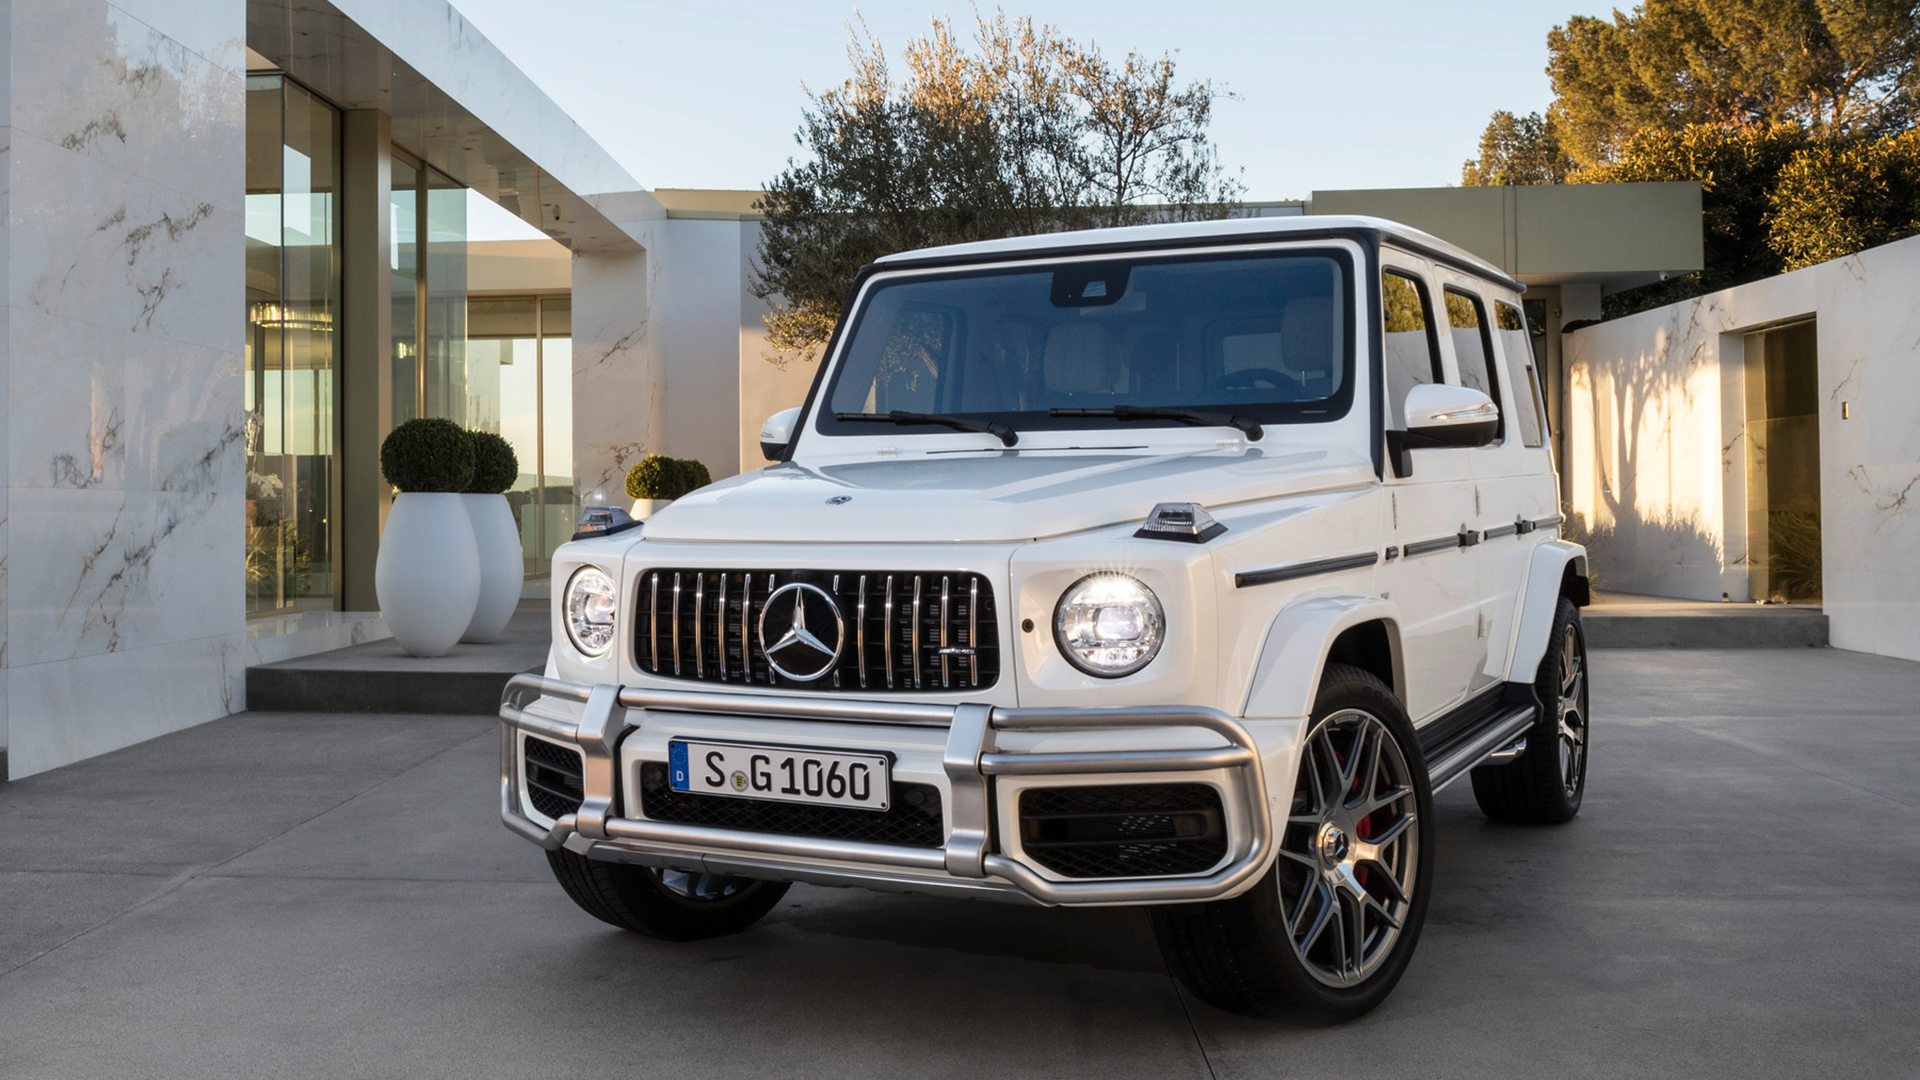 Mercedes Benz G Wagon Price In India 2019 G 550 Luxury Off